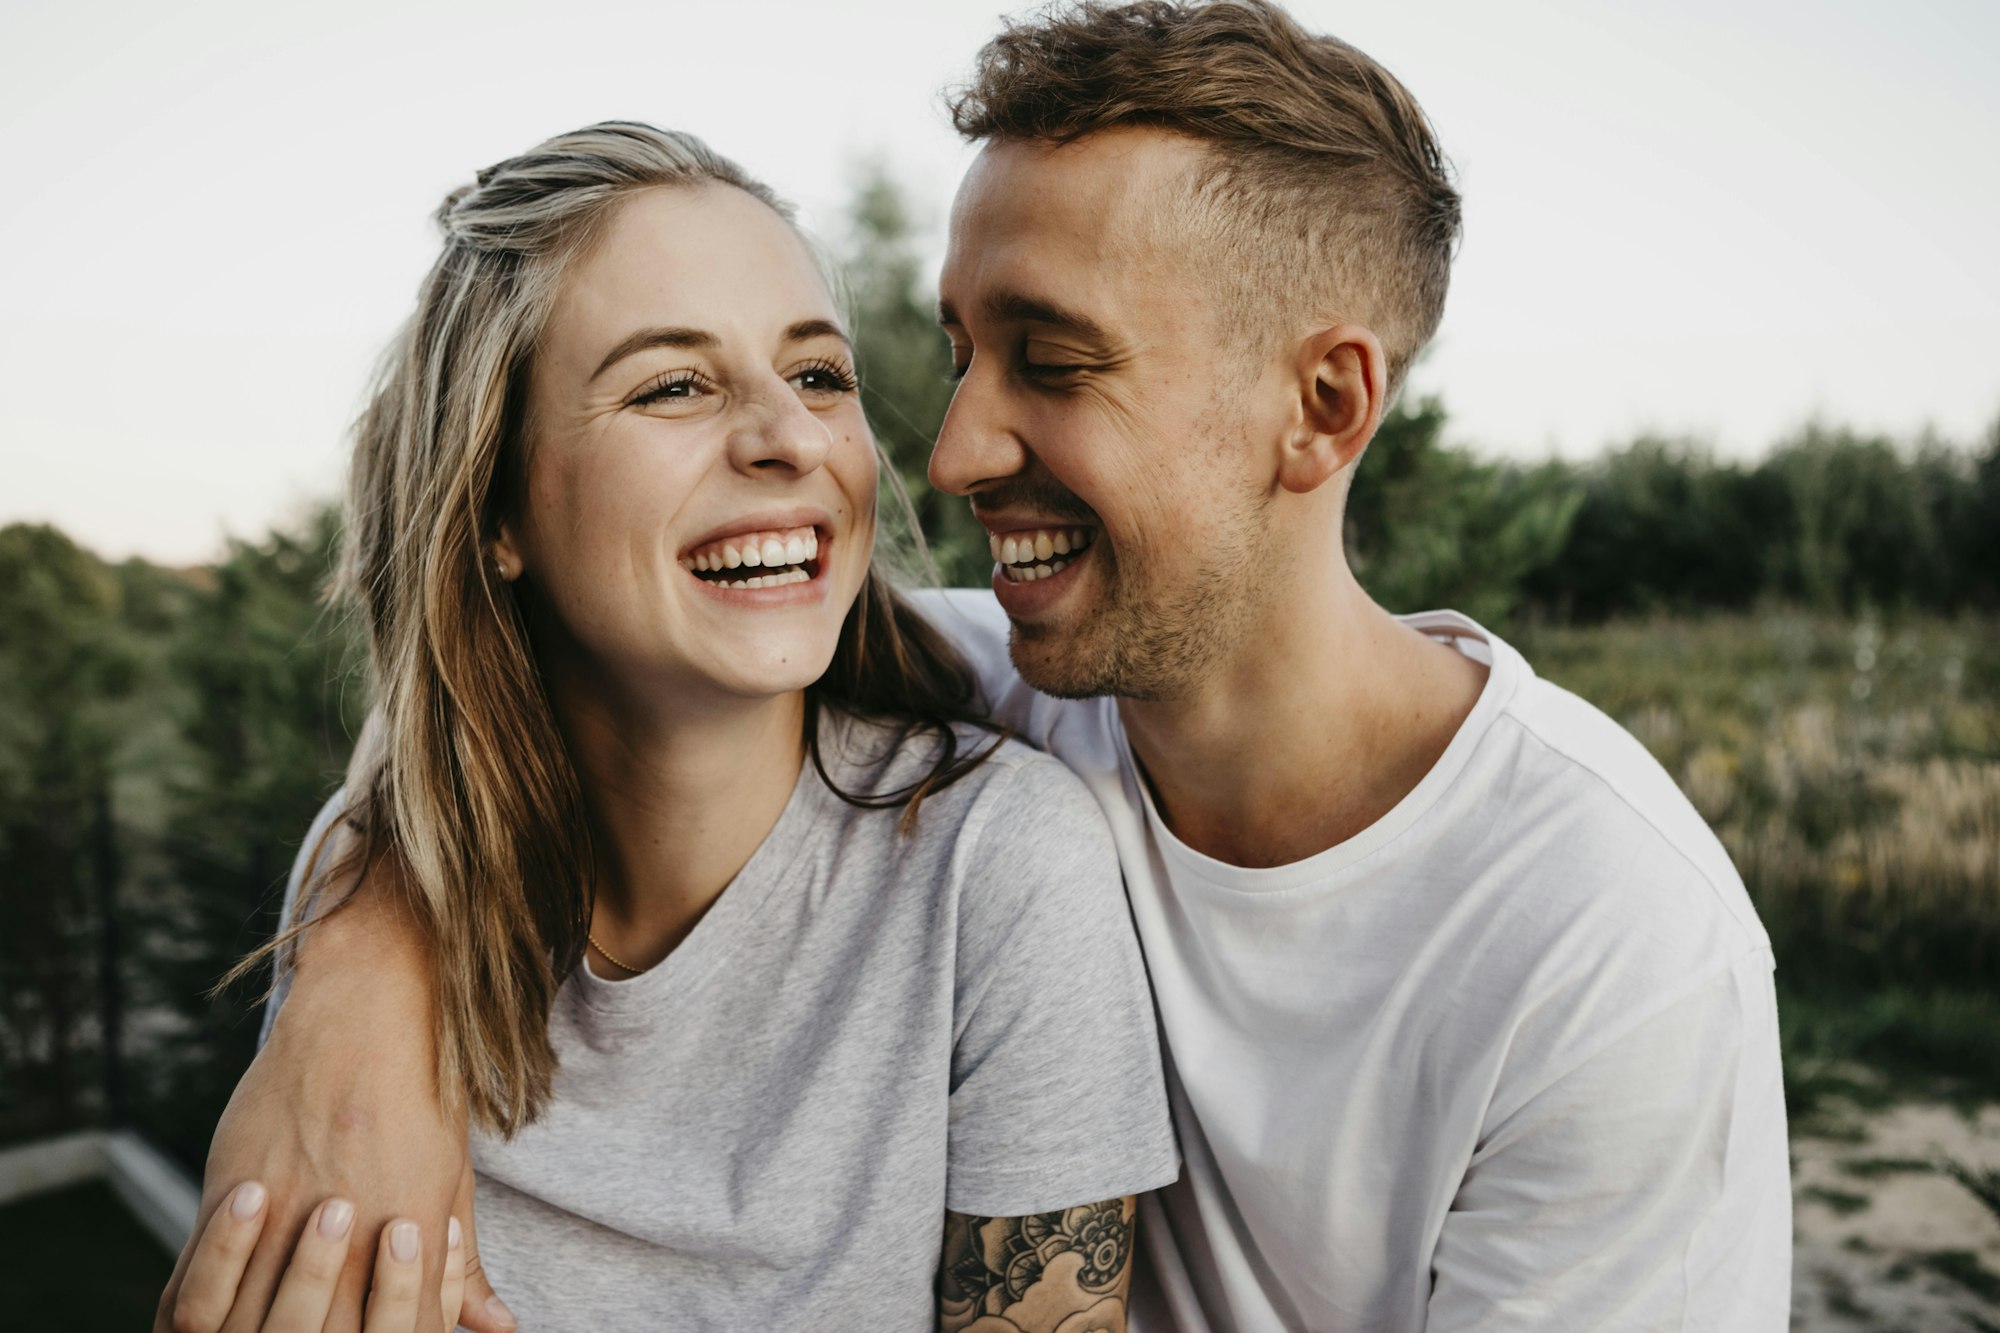 Portrait of young laughing couple